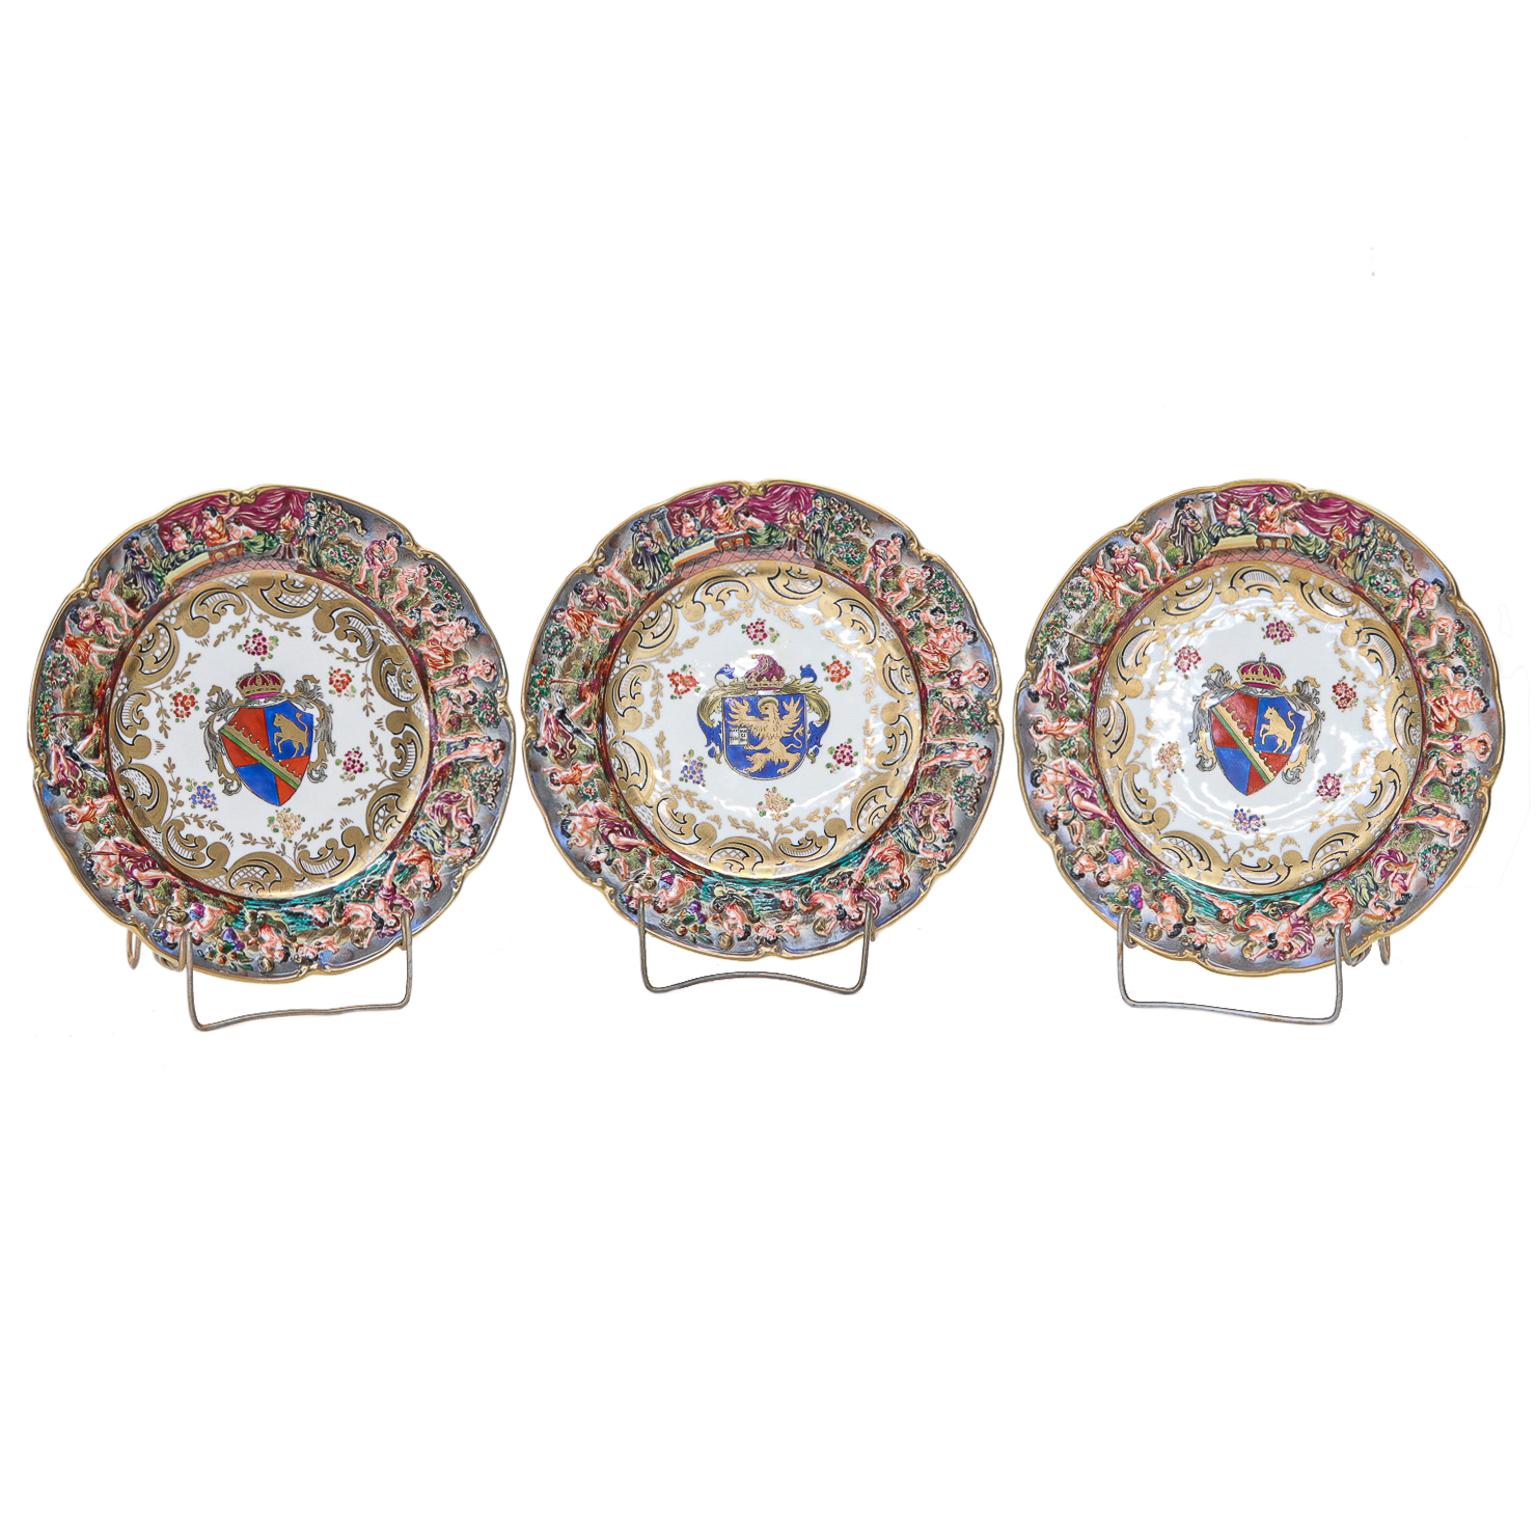 An exquisite set of 12 Capo di Monte Armorial porcelain cabinet plates from the late 19th century.
Each is painted with a unique familial crest in the center with a gilt border, scrolled, and dotted scrolls. The rims are raised with bacchanalian